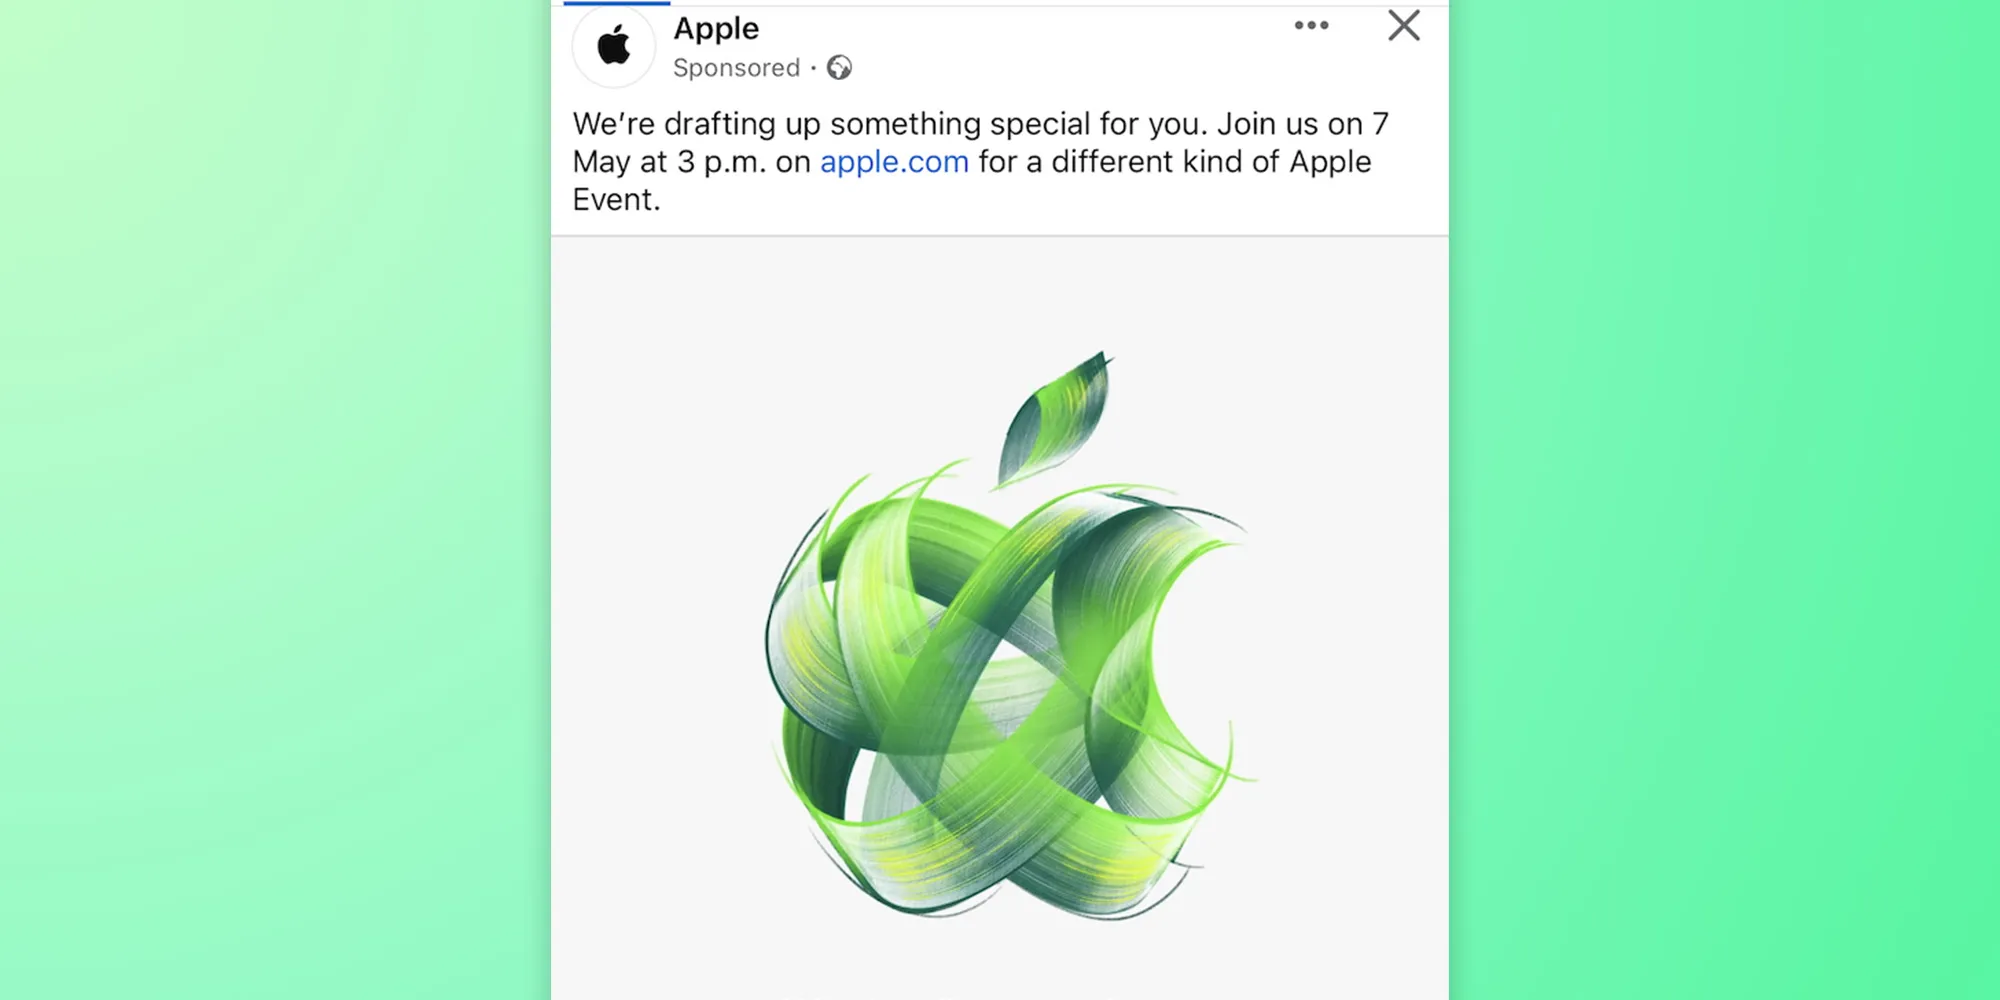 Apple's "Let Loose" event set for May 7, promises a unique experience